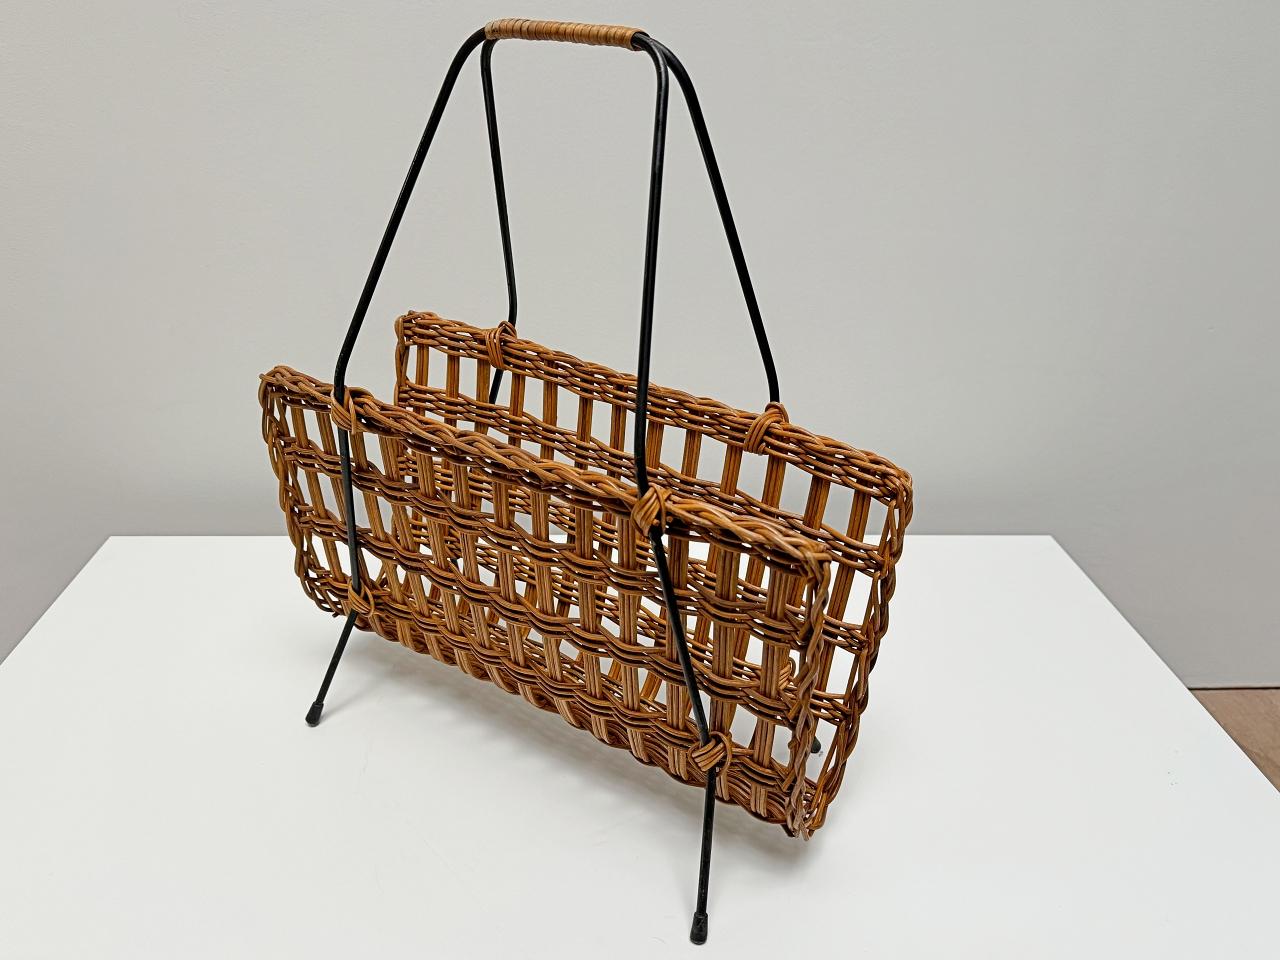 Patinated Jacques Adnet Wicker Magazine Rack, Black Iron Frame, 1950s, France For Sale